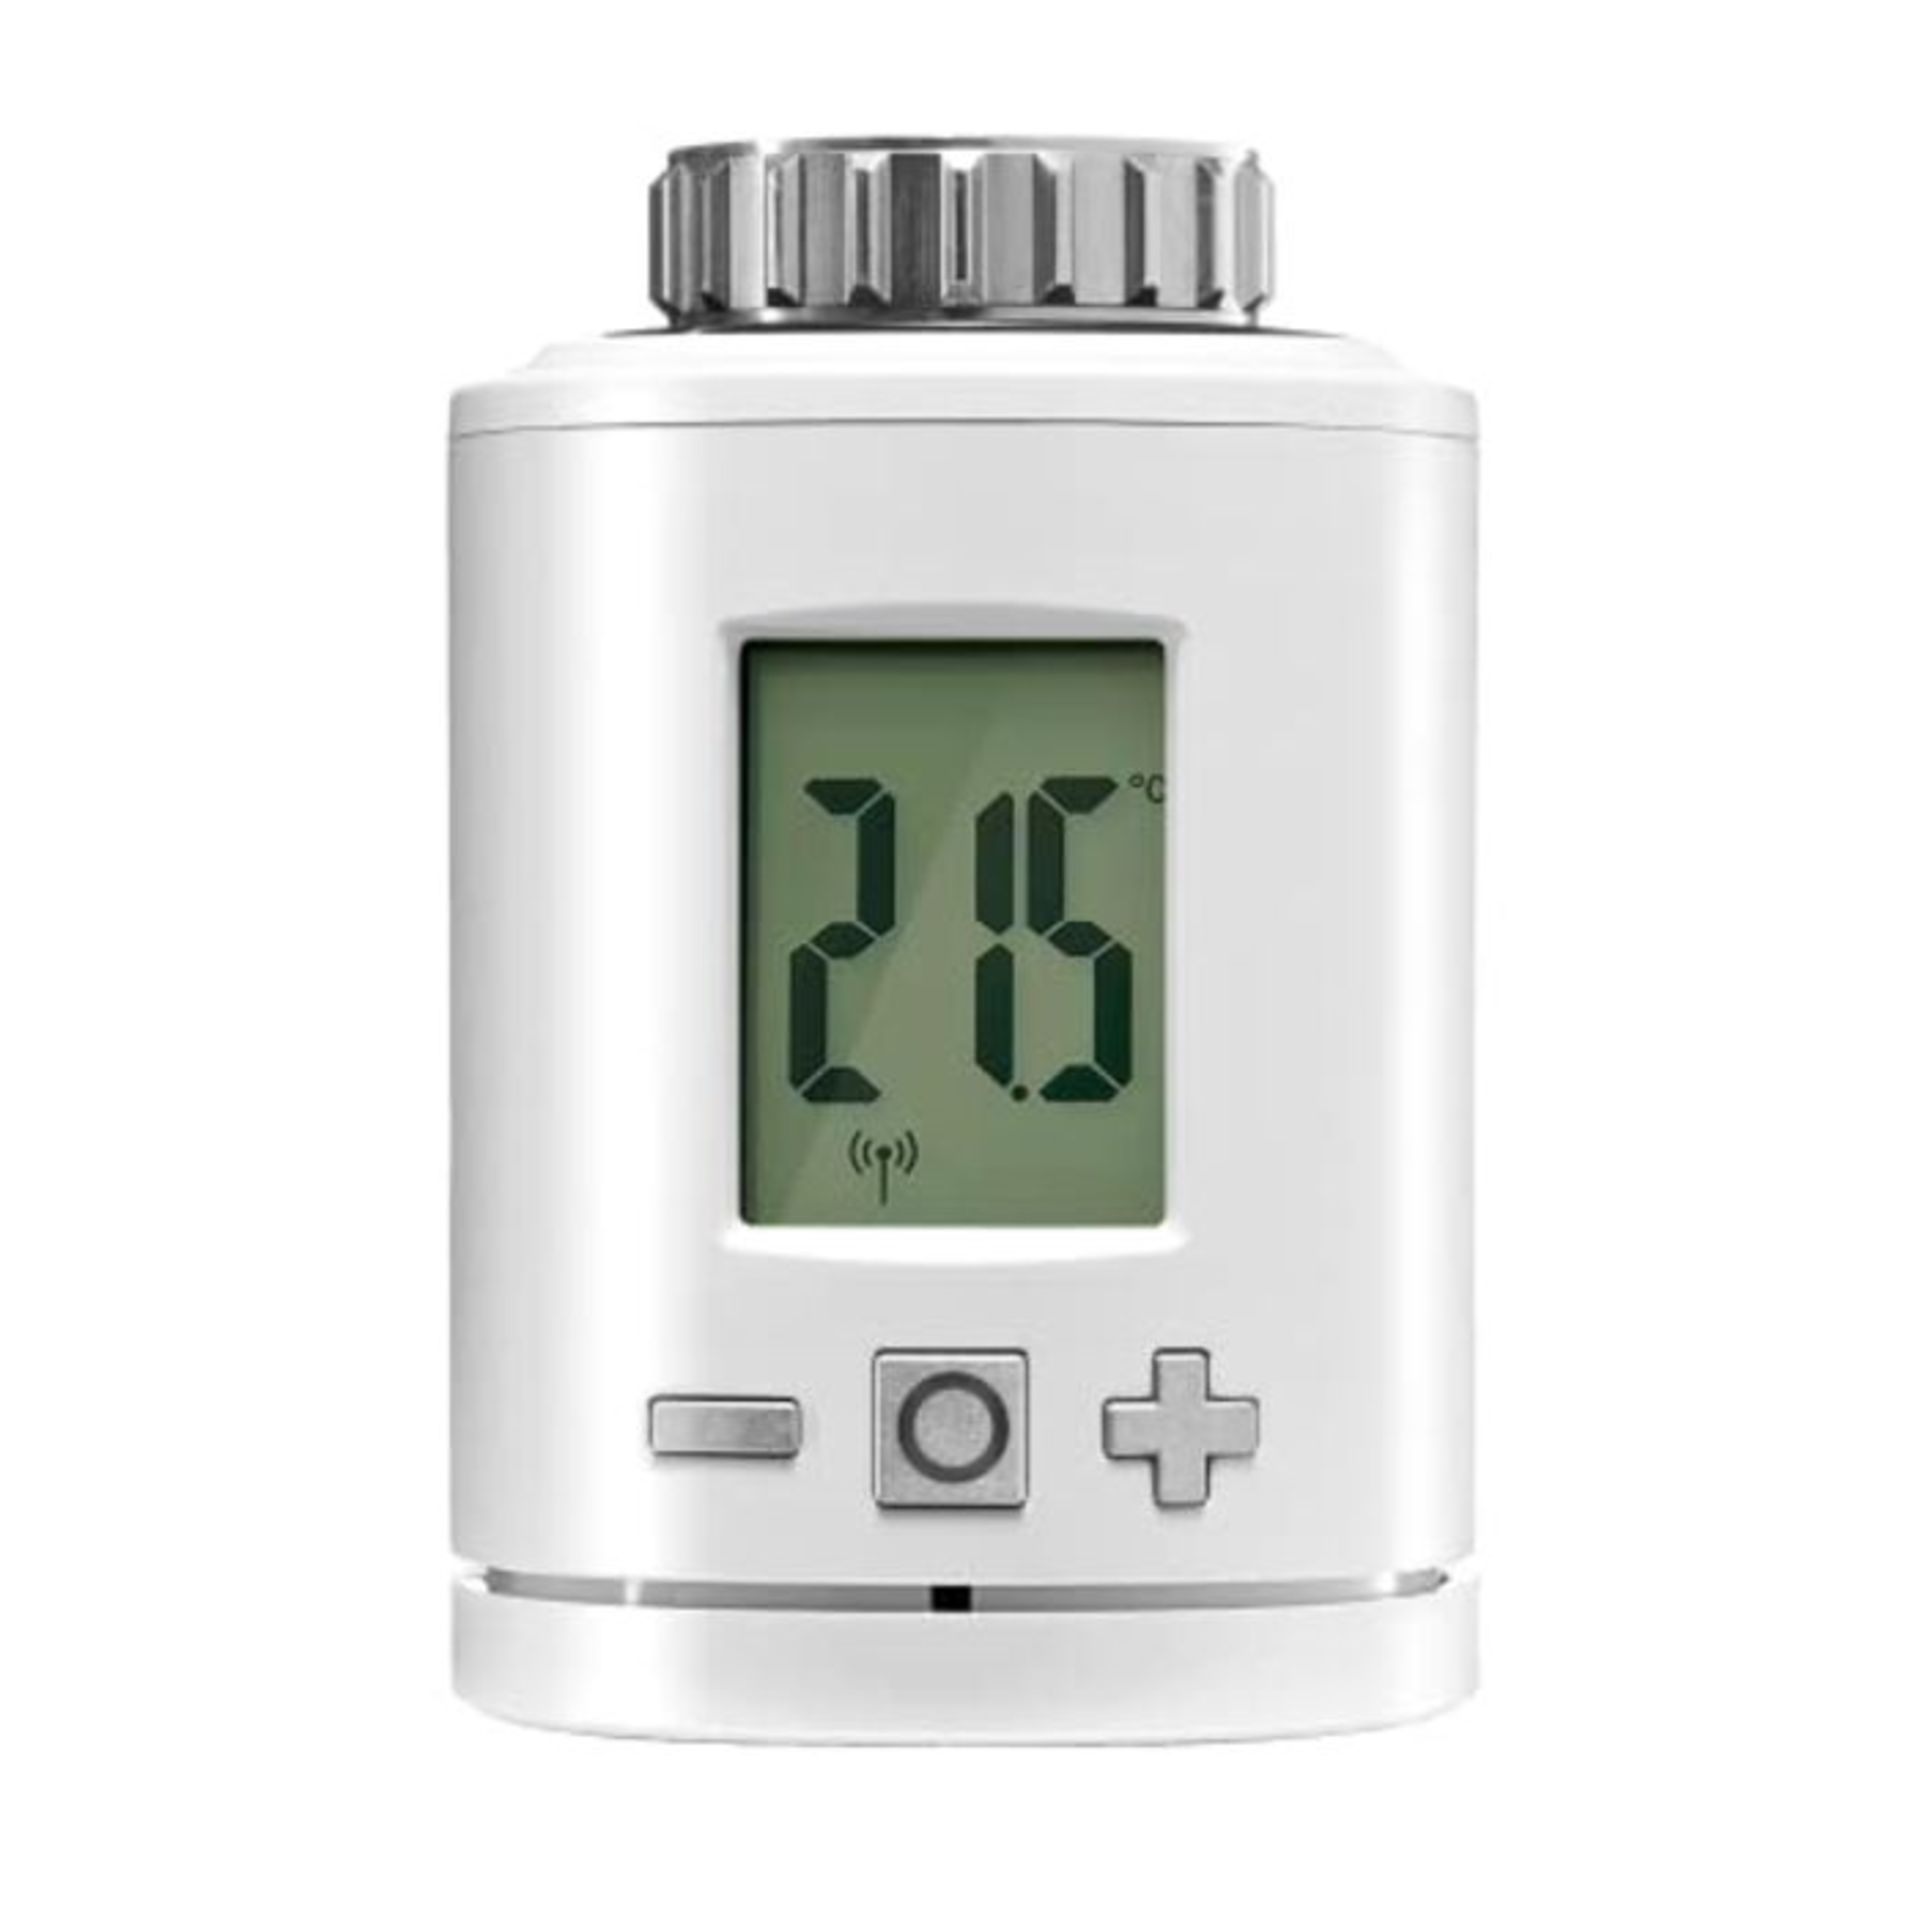 Gigaset Thermostat, White [International Version, Not Compatible in the UK]